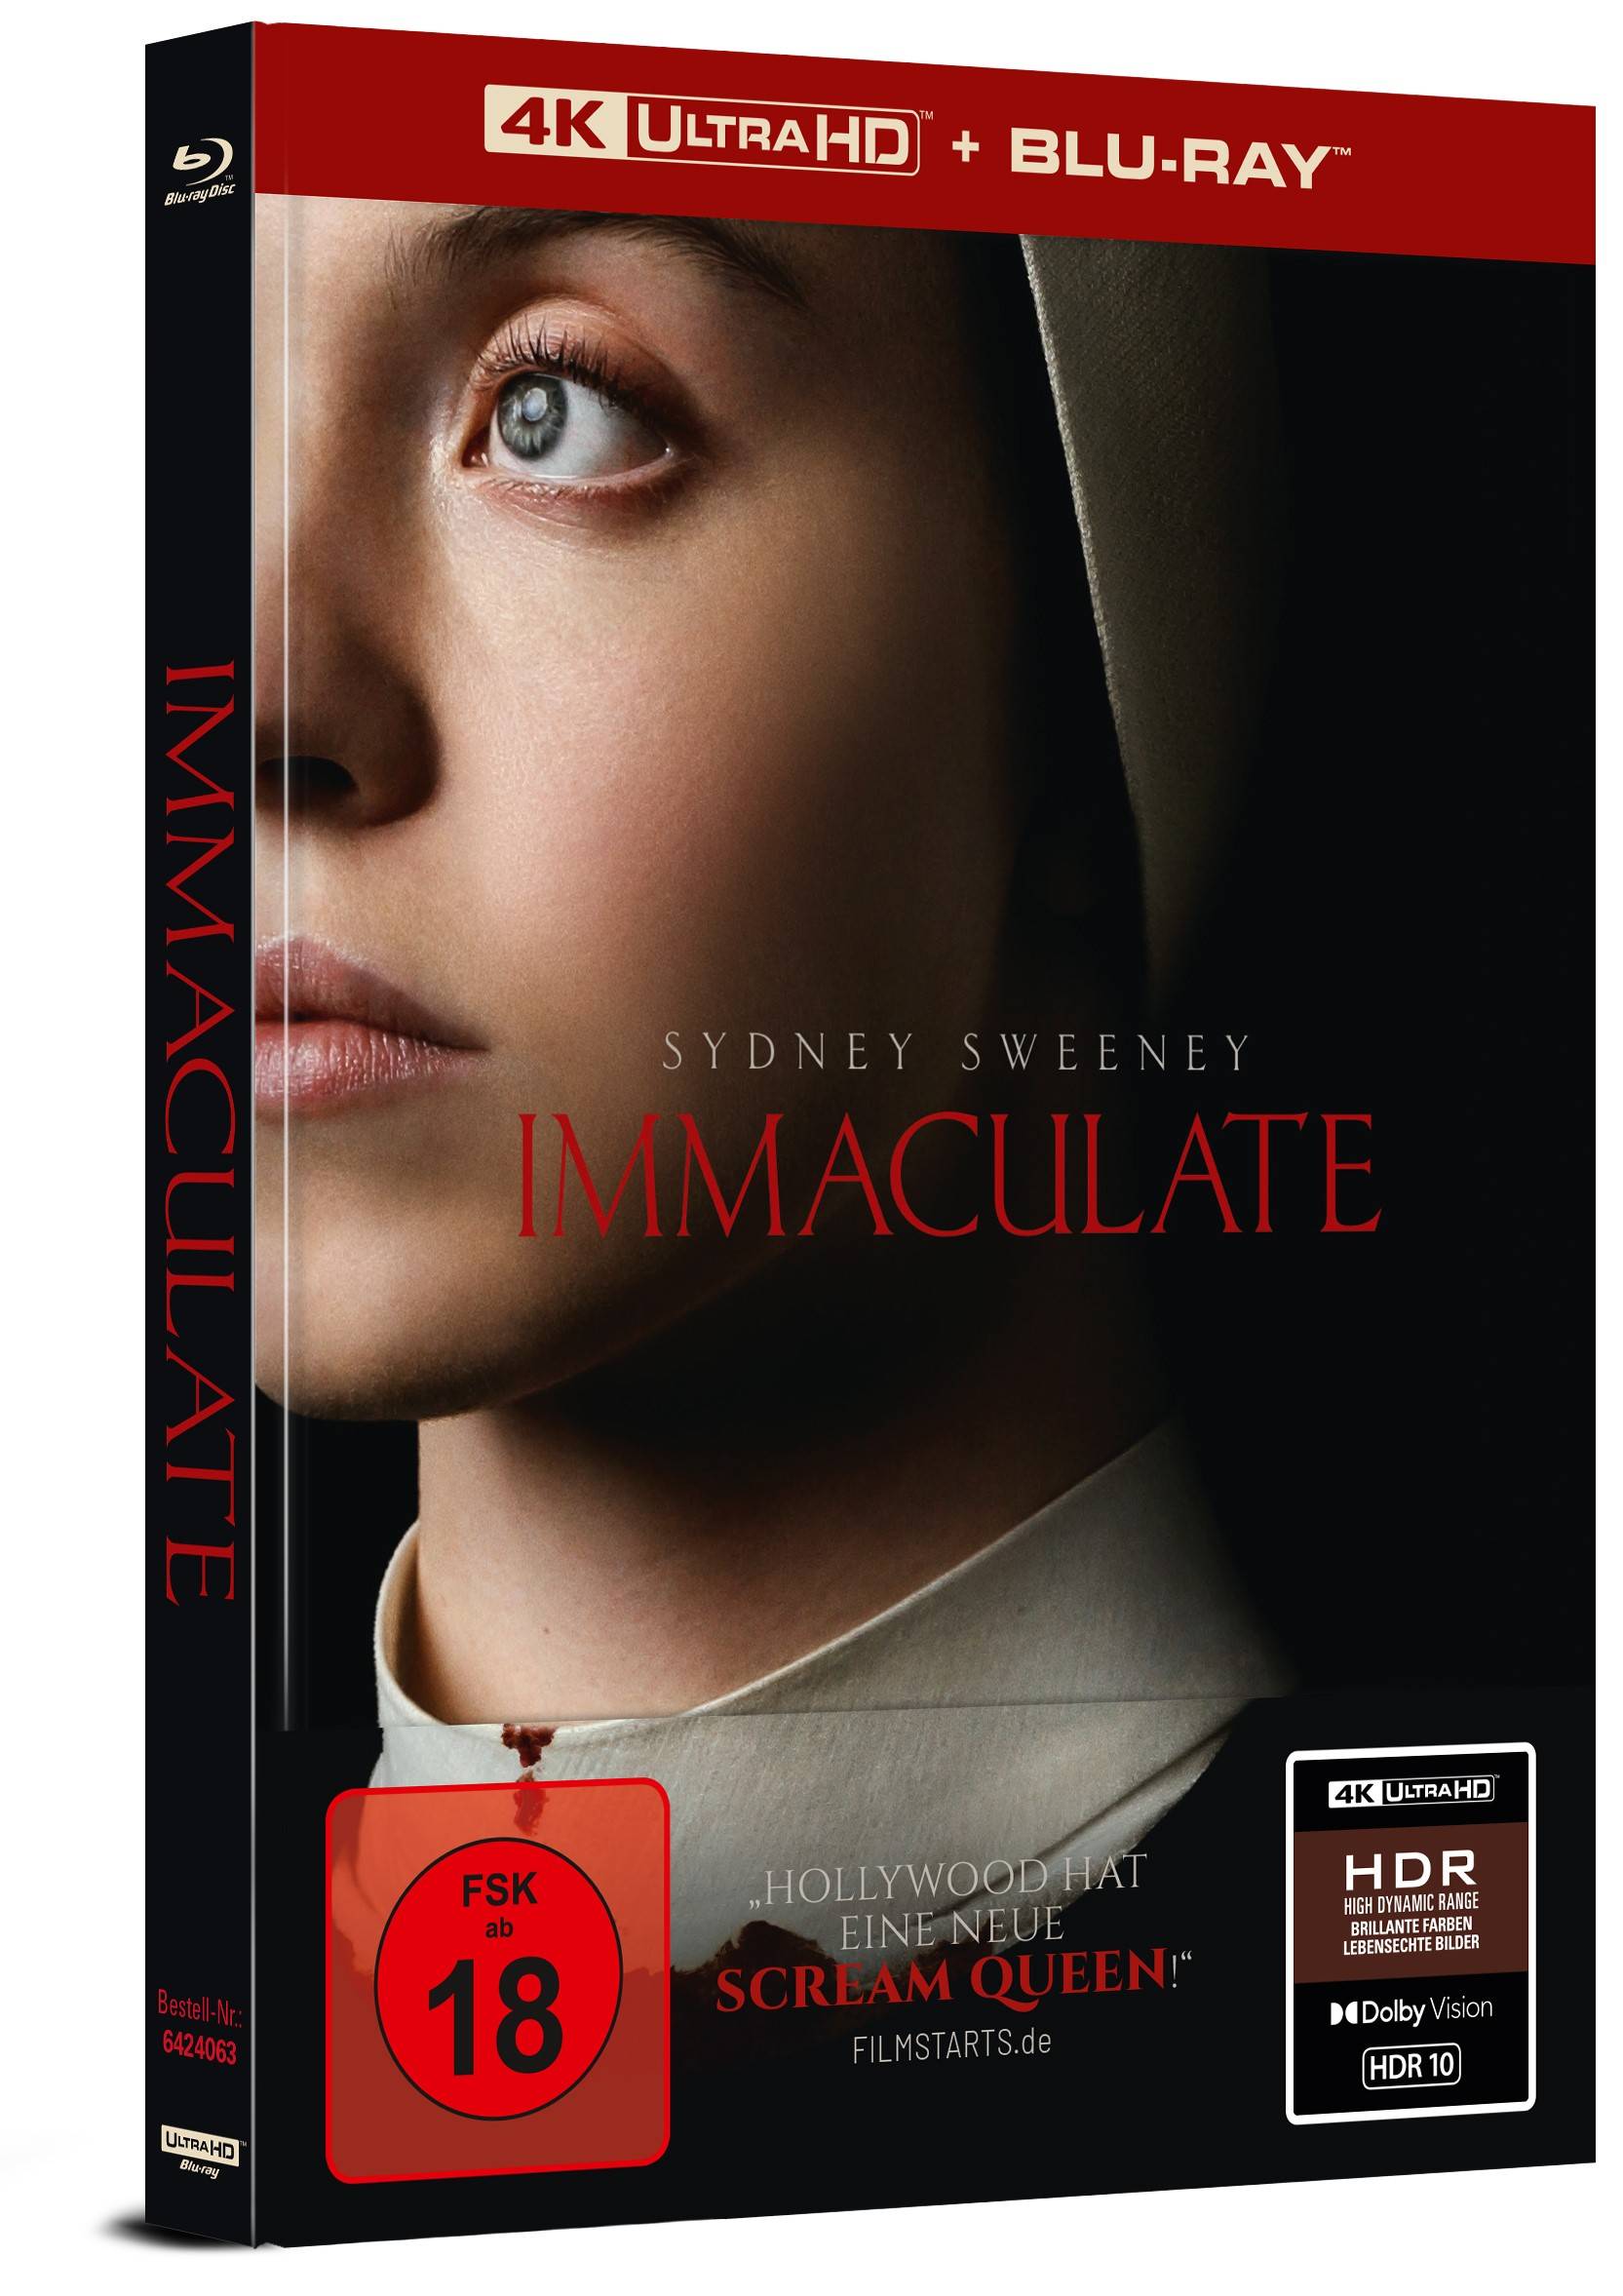 Immaculate - 2-Disc Limited Collector's Mediabook (UHD-Blu-ray + Blu-ray)